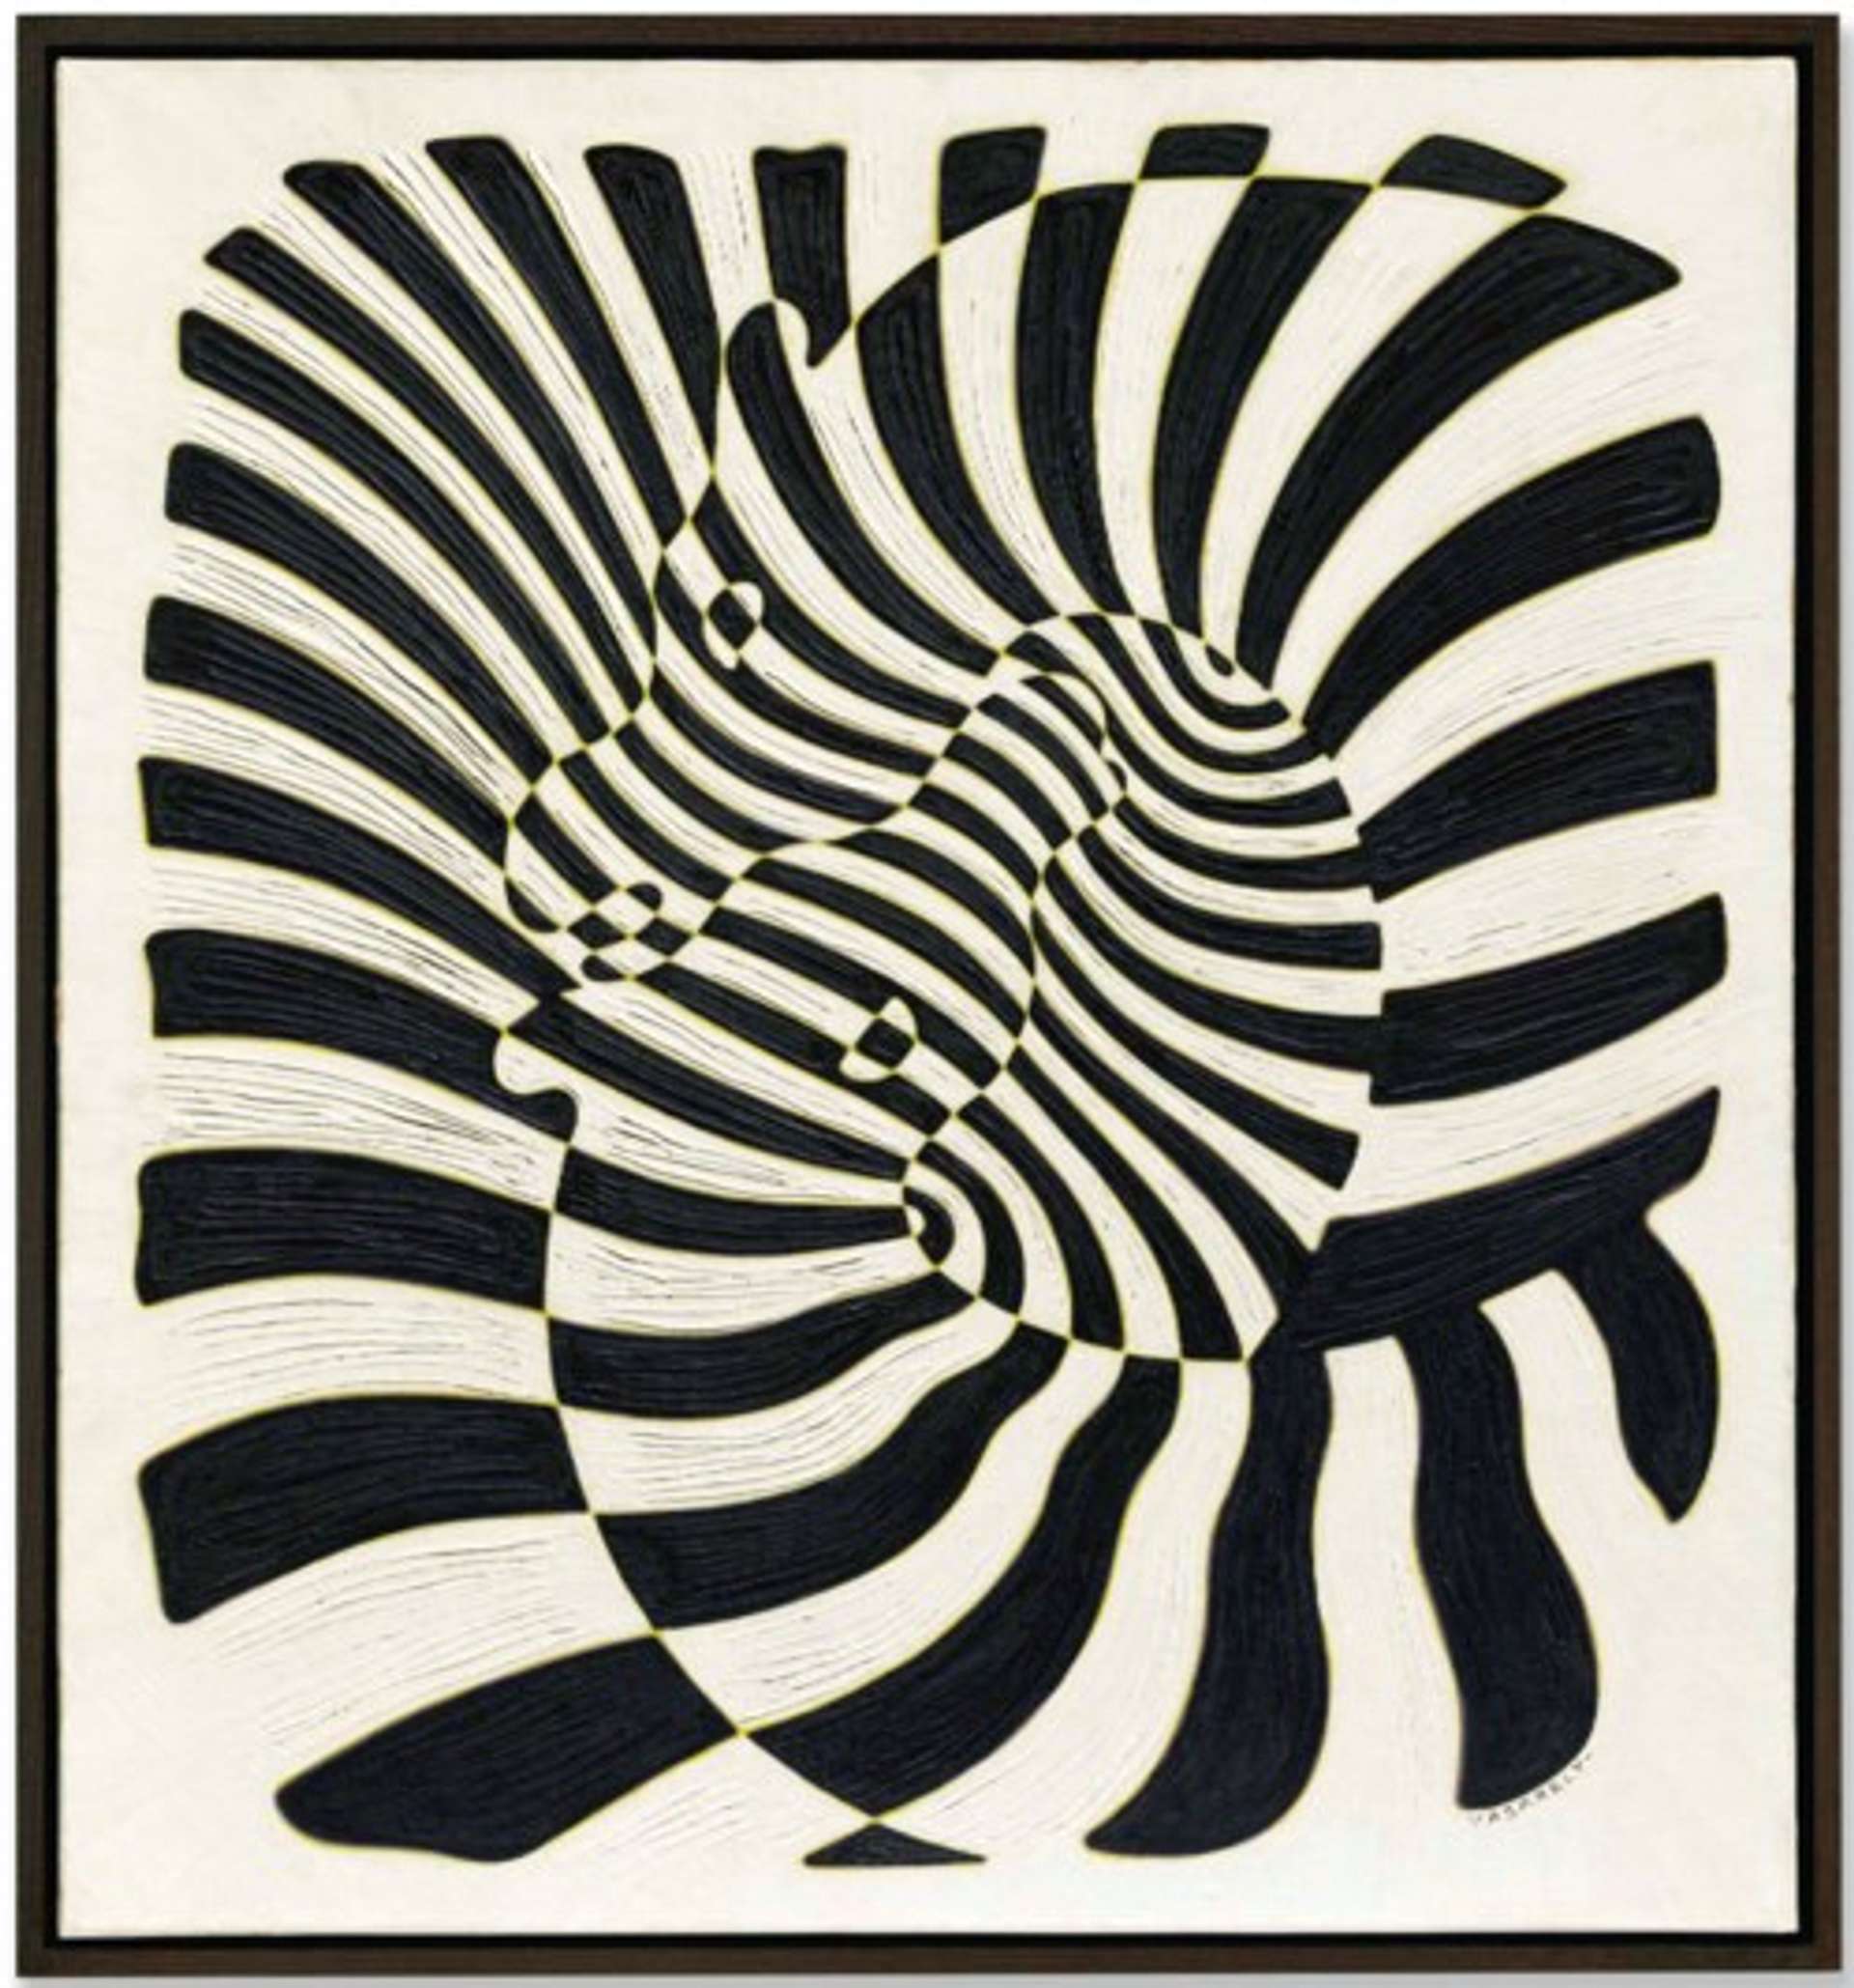 An optical view of two intertwined zebra necks forming an illusion of striped patterns. The zebras' heads emerge, revealing their camouflaged facial features.